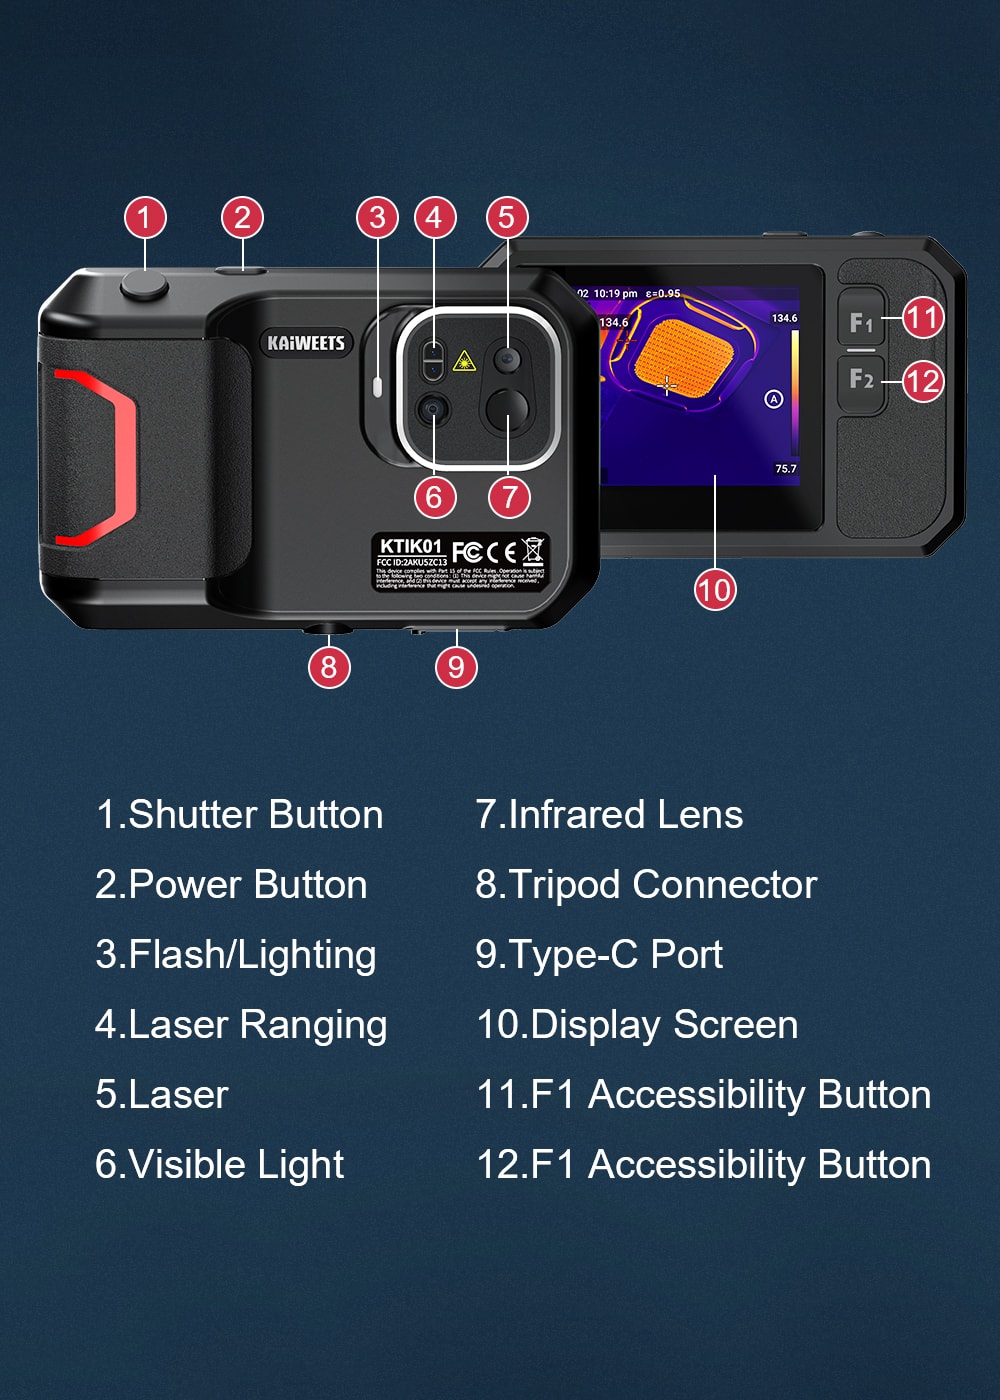 KTI-K01 intelligent thermal imager interface introduction